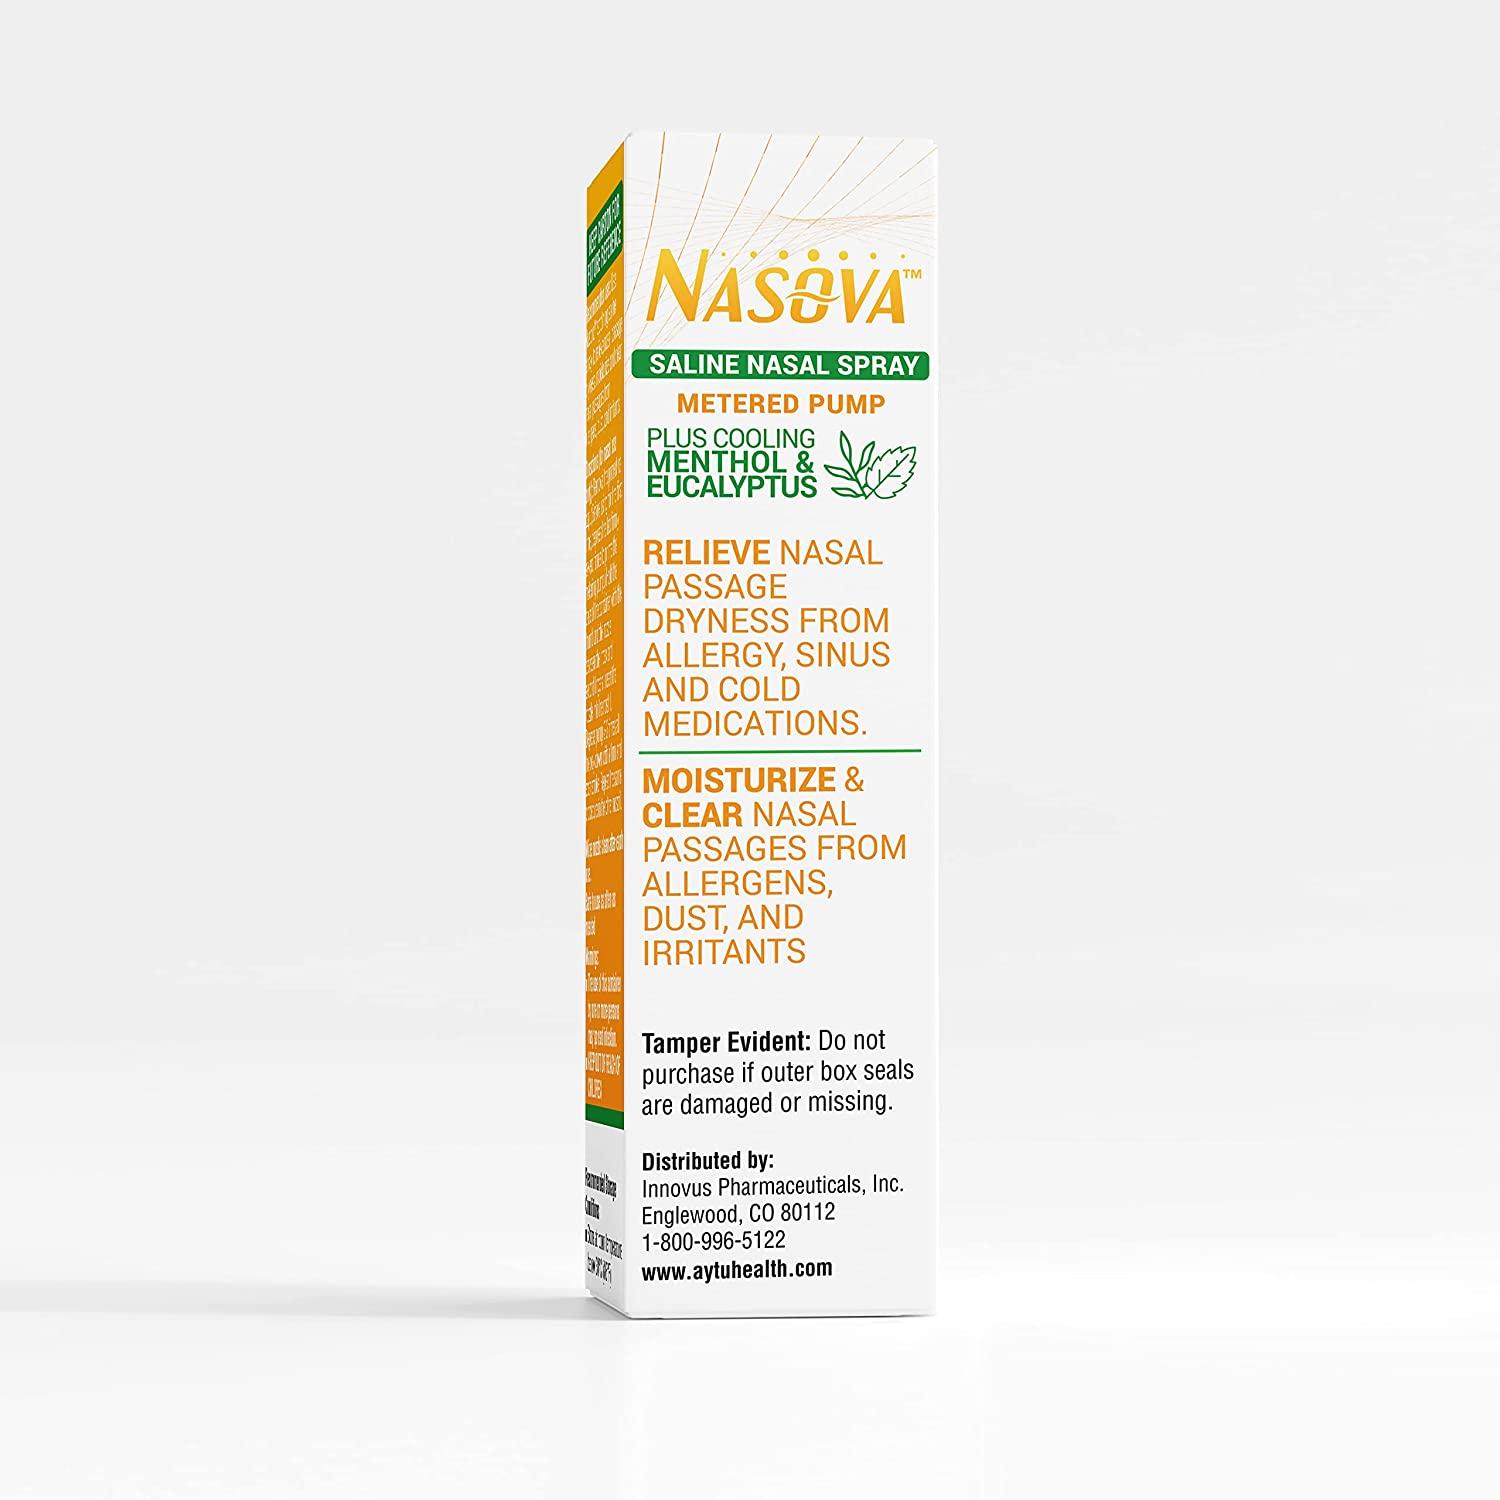 Nasova Saline Spray with Menthol and Eucalyptus (0.5 Ounce) Moisturizing,  Cooling Spray for Nasal Dryness Relief, Clear Nasal Passages from  Allergens, Dust, and Irritants